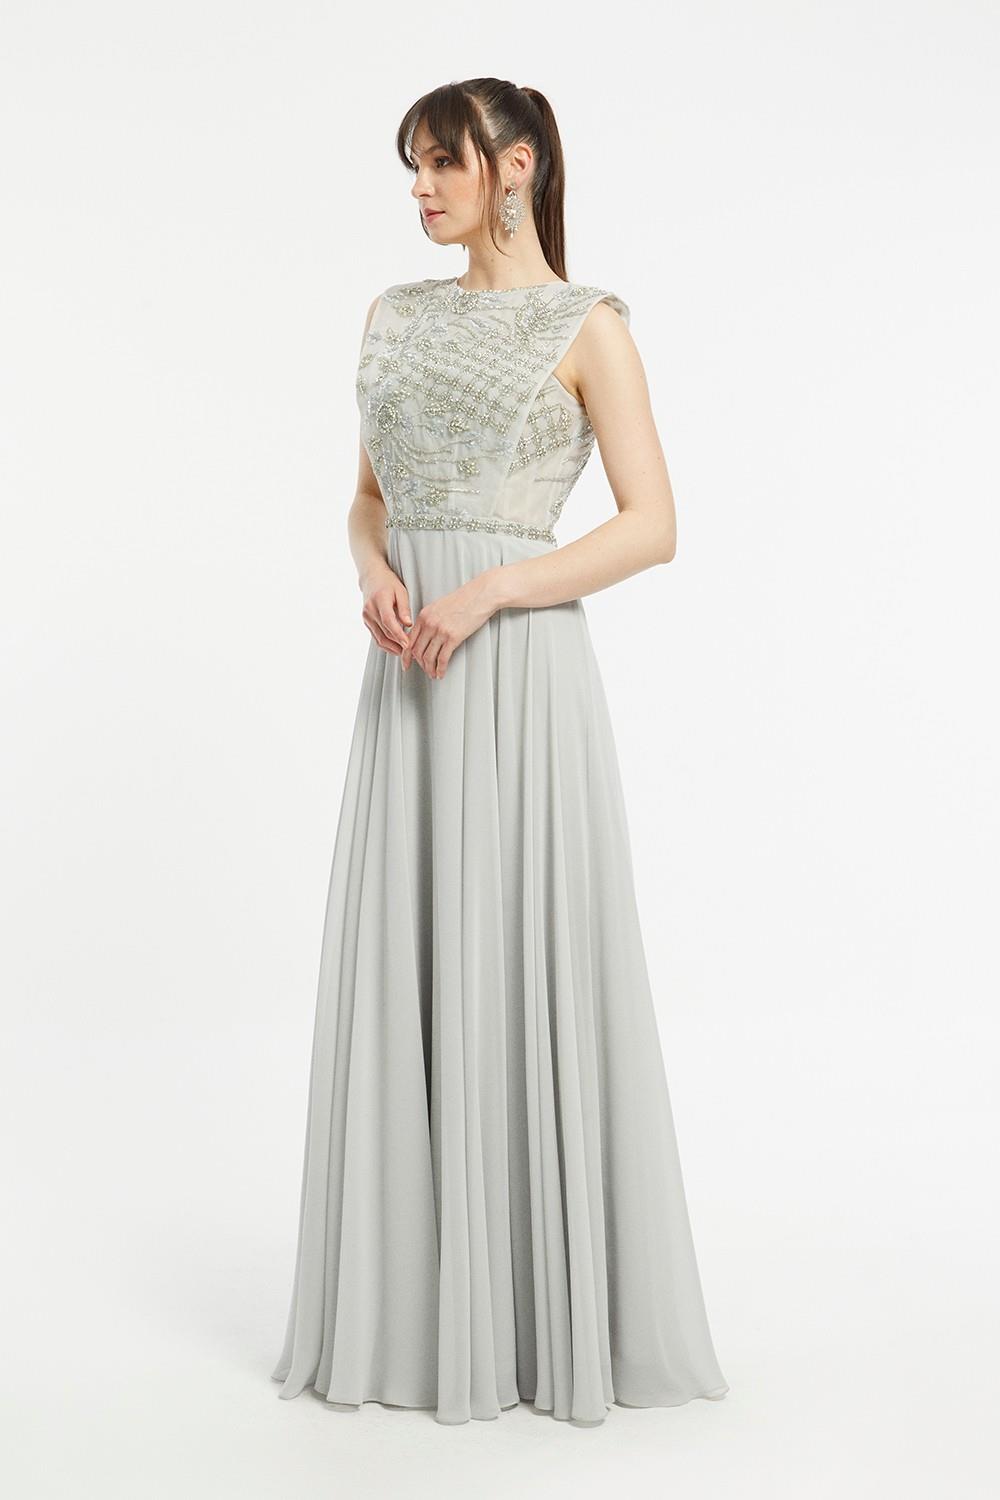 Zero Sleeve Bling Embroidered Long Evening Dress